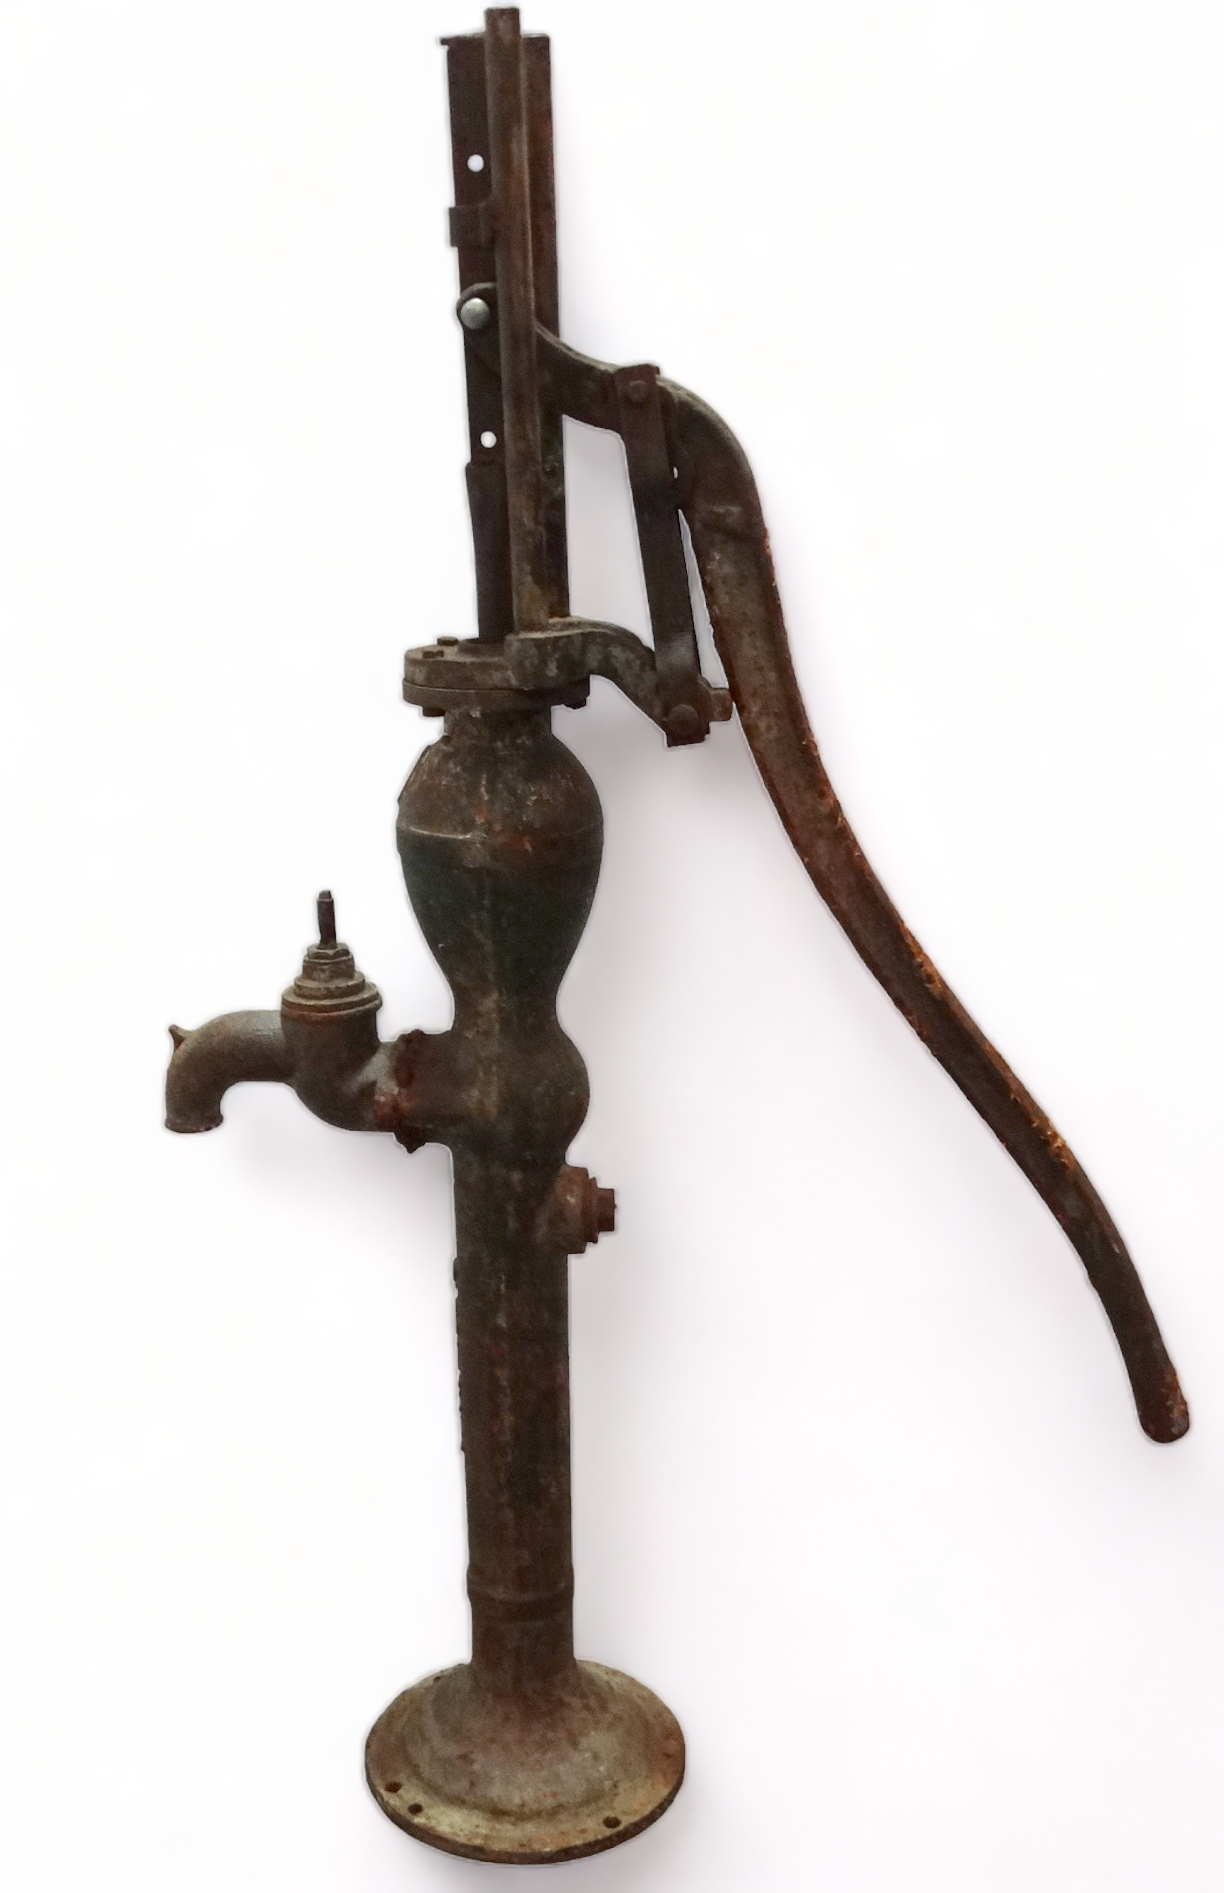 A cast iron pump - the spout with a tap fitting, height 125cm.